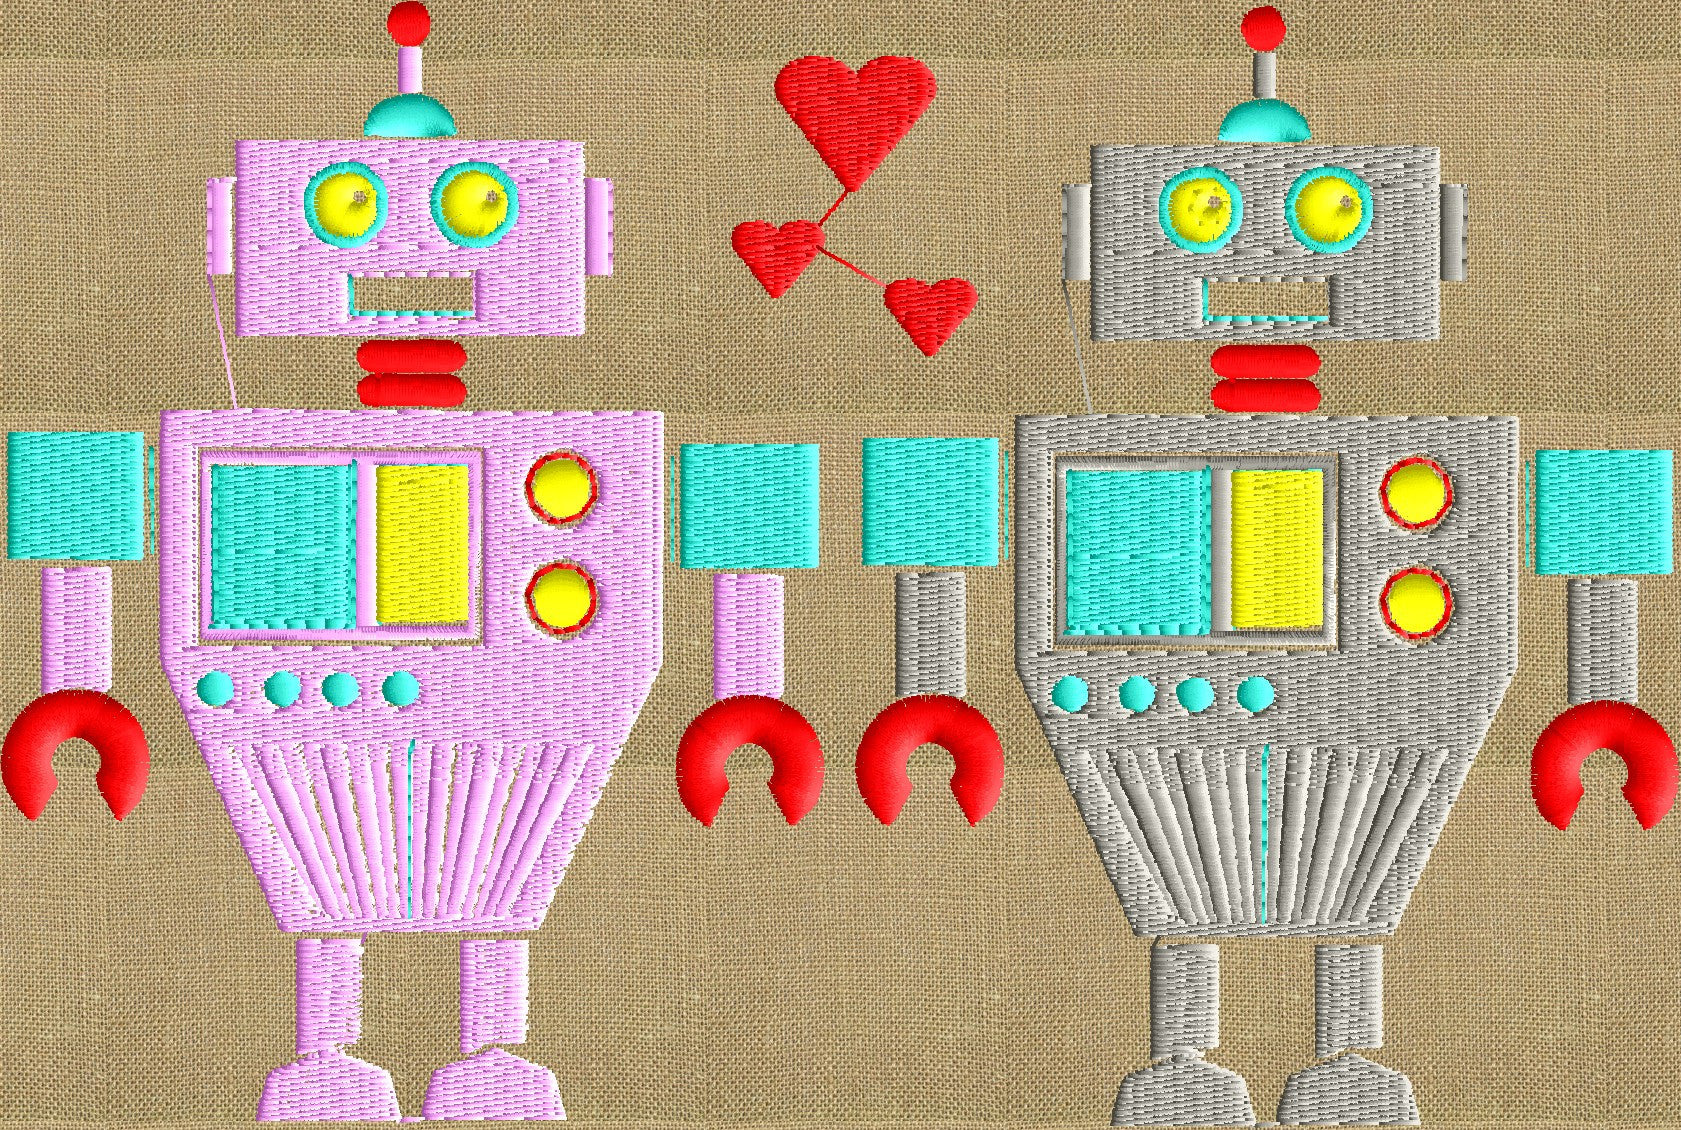 Robot Love - Valentines Day themed - EMBROIDERY DESIGN FILE- Instant download - Exp Jef Vp3 Pes Dst formats - 5x7 hoops and larger